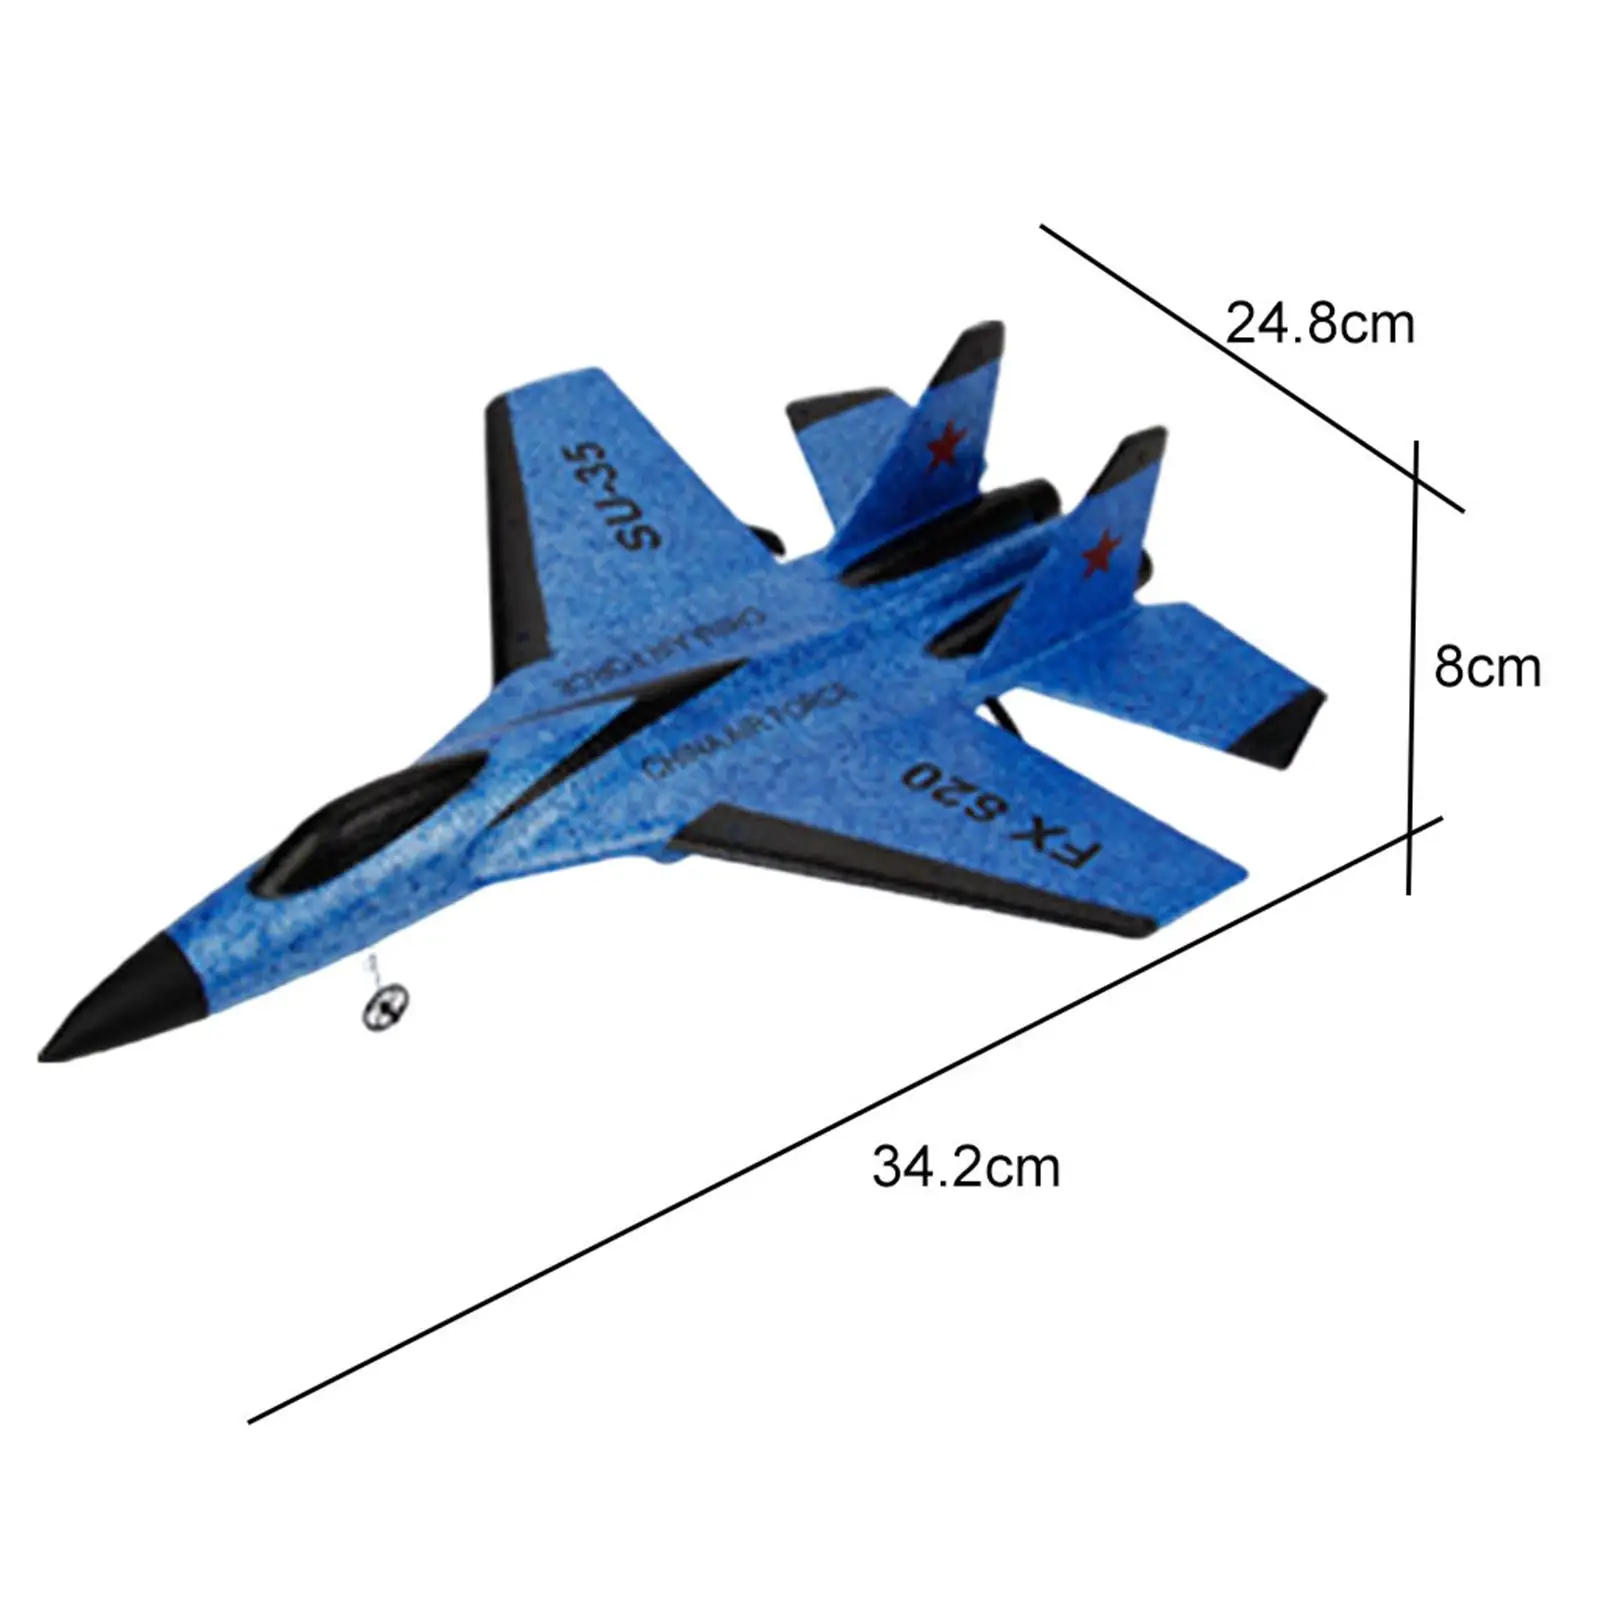 2.4G 2CH Remote Control Aircraft Foam Outdoor Game Birthday Gifts for Kids